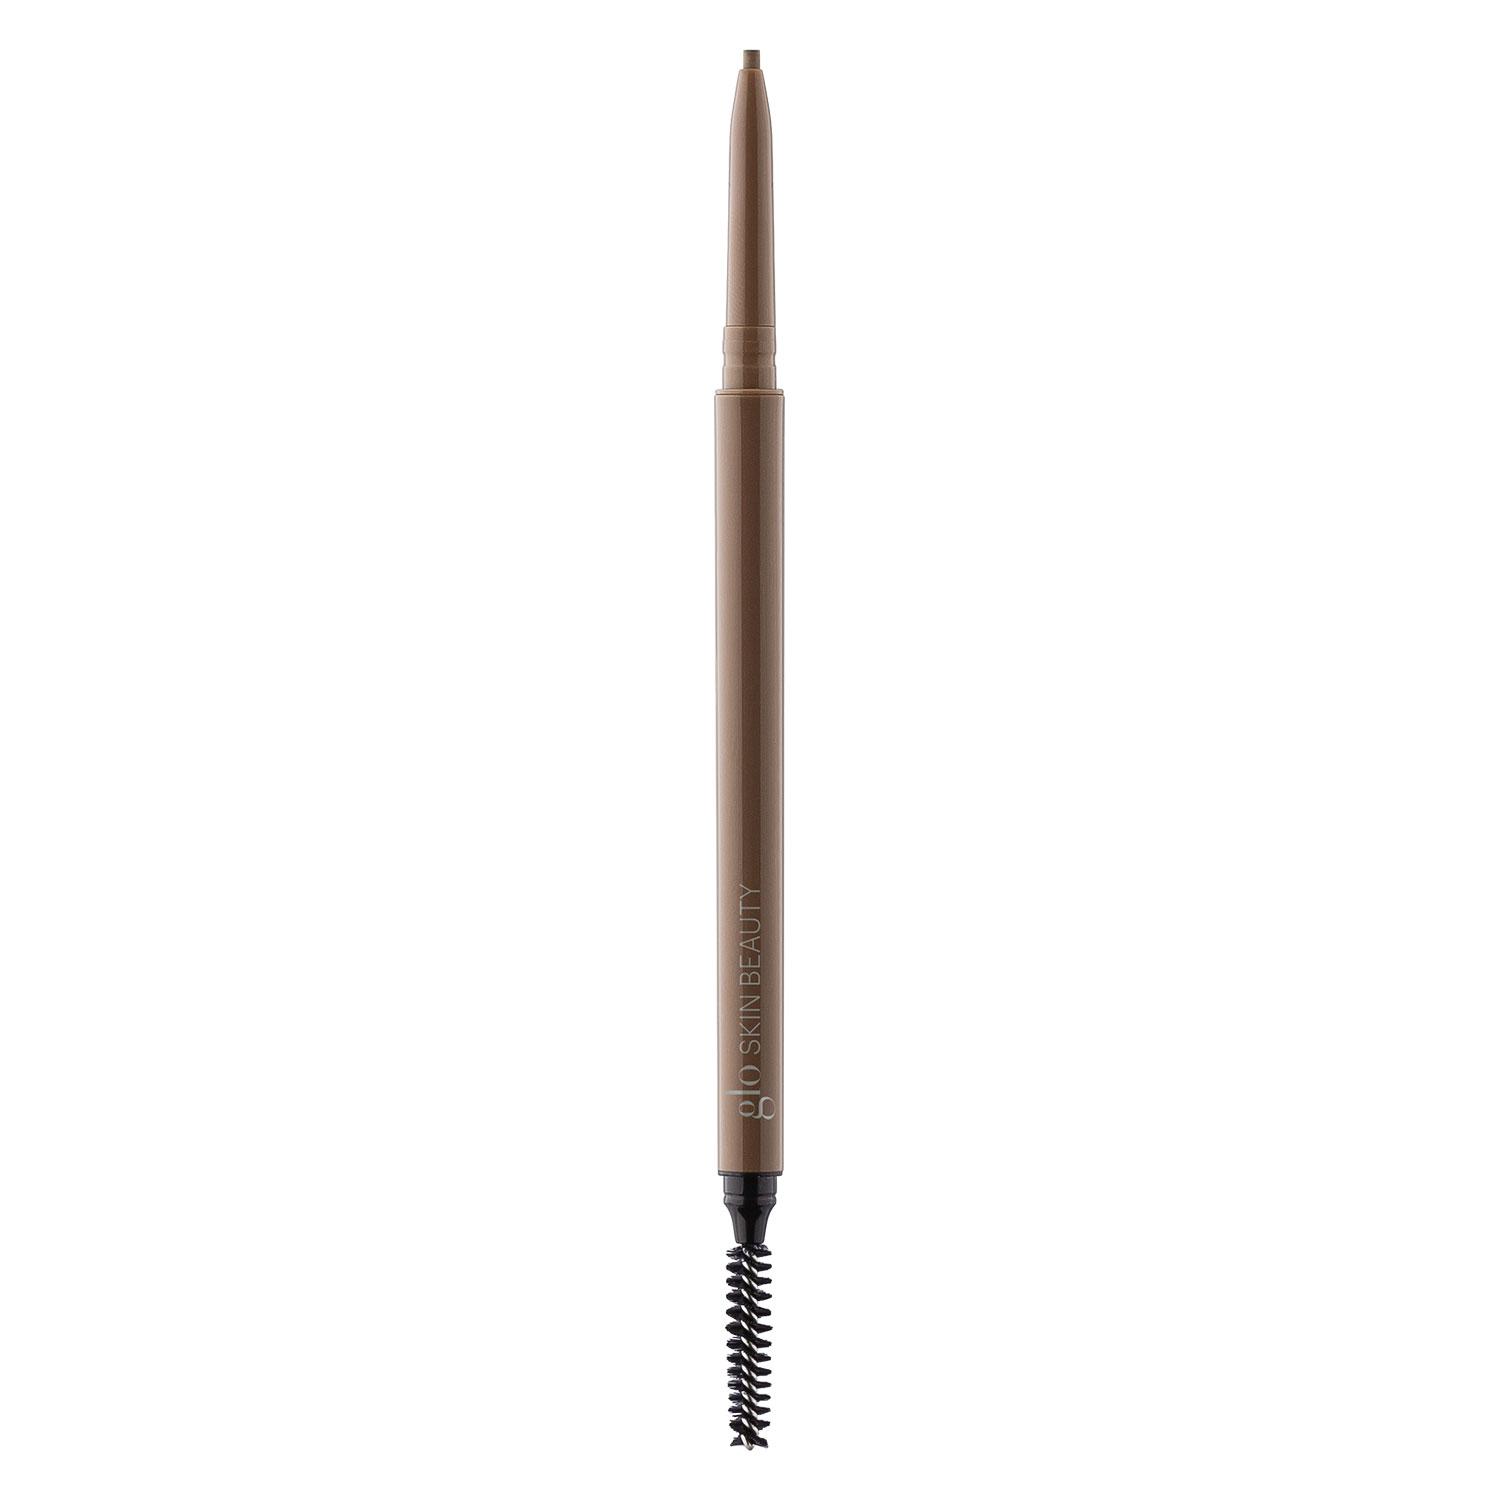 Glo Skin Beauty Brows - Precise Micro Browliner Light Brown